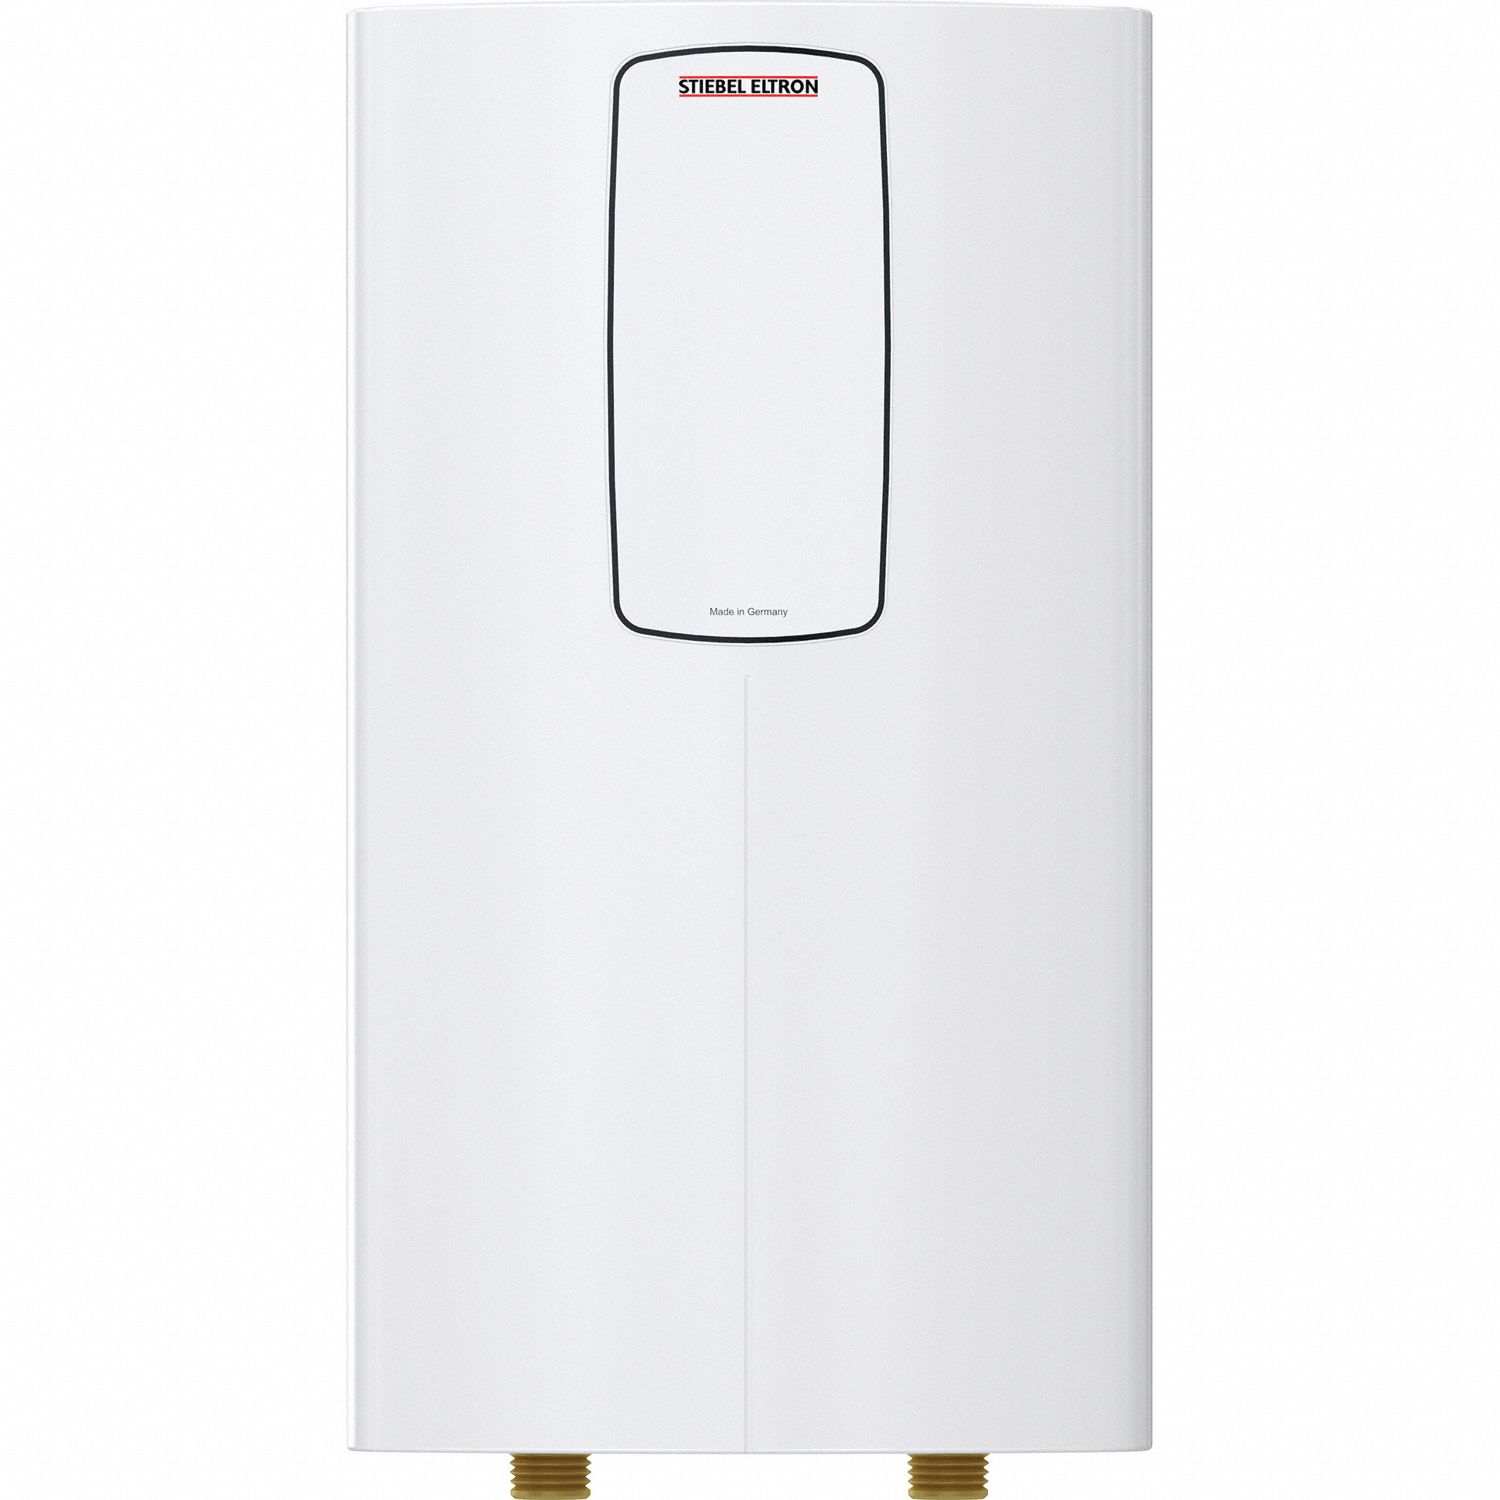 Electric Tankless Water Heater, General Purpose, 240/208V, 3800W, 16A